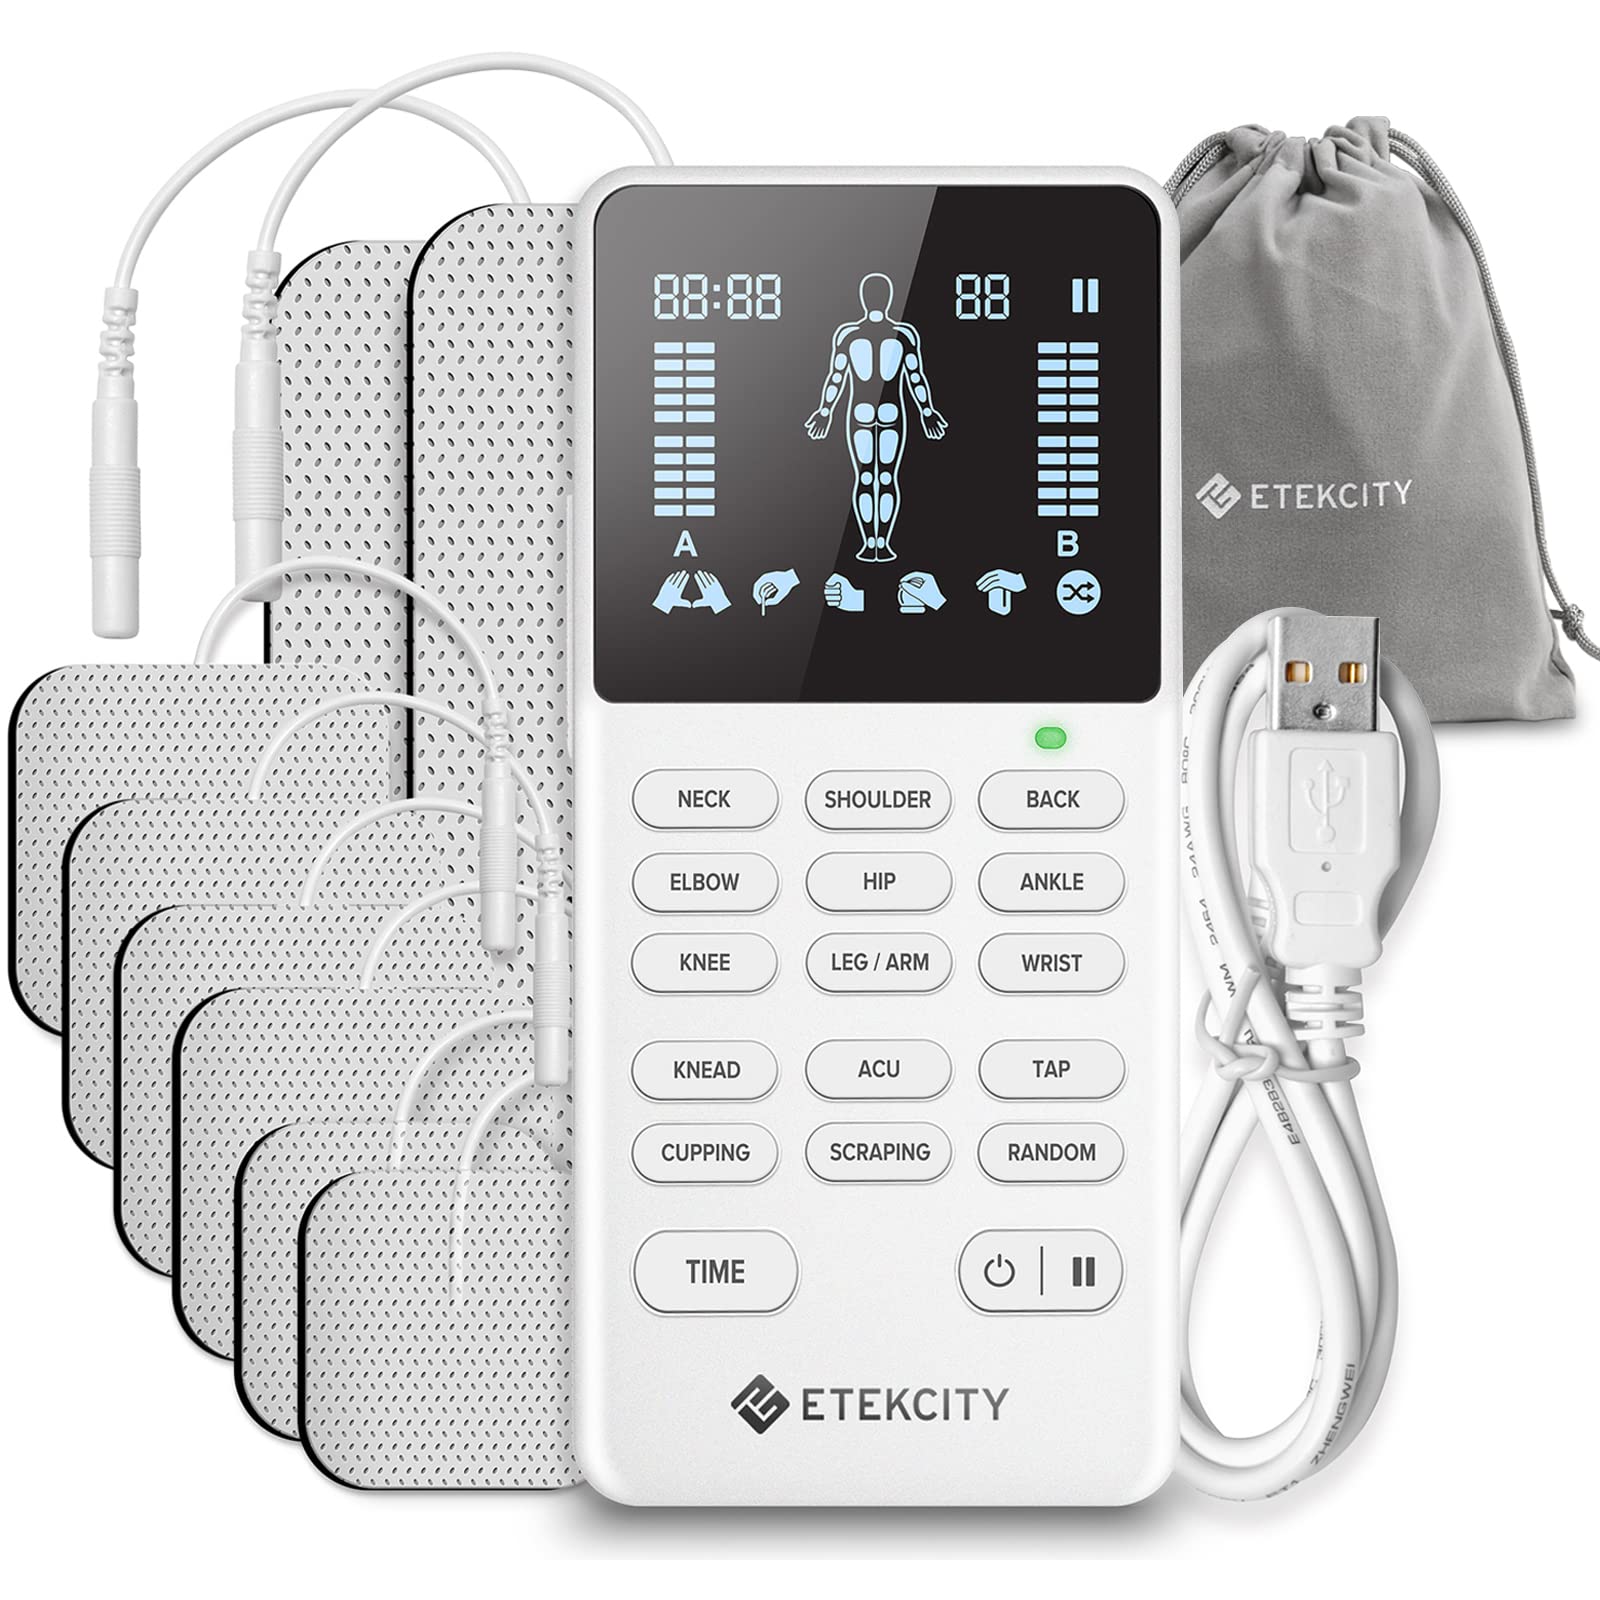 Best Portable Electro Massage Therapy Device TENS unit 6 Modes FDA CLEARED  He